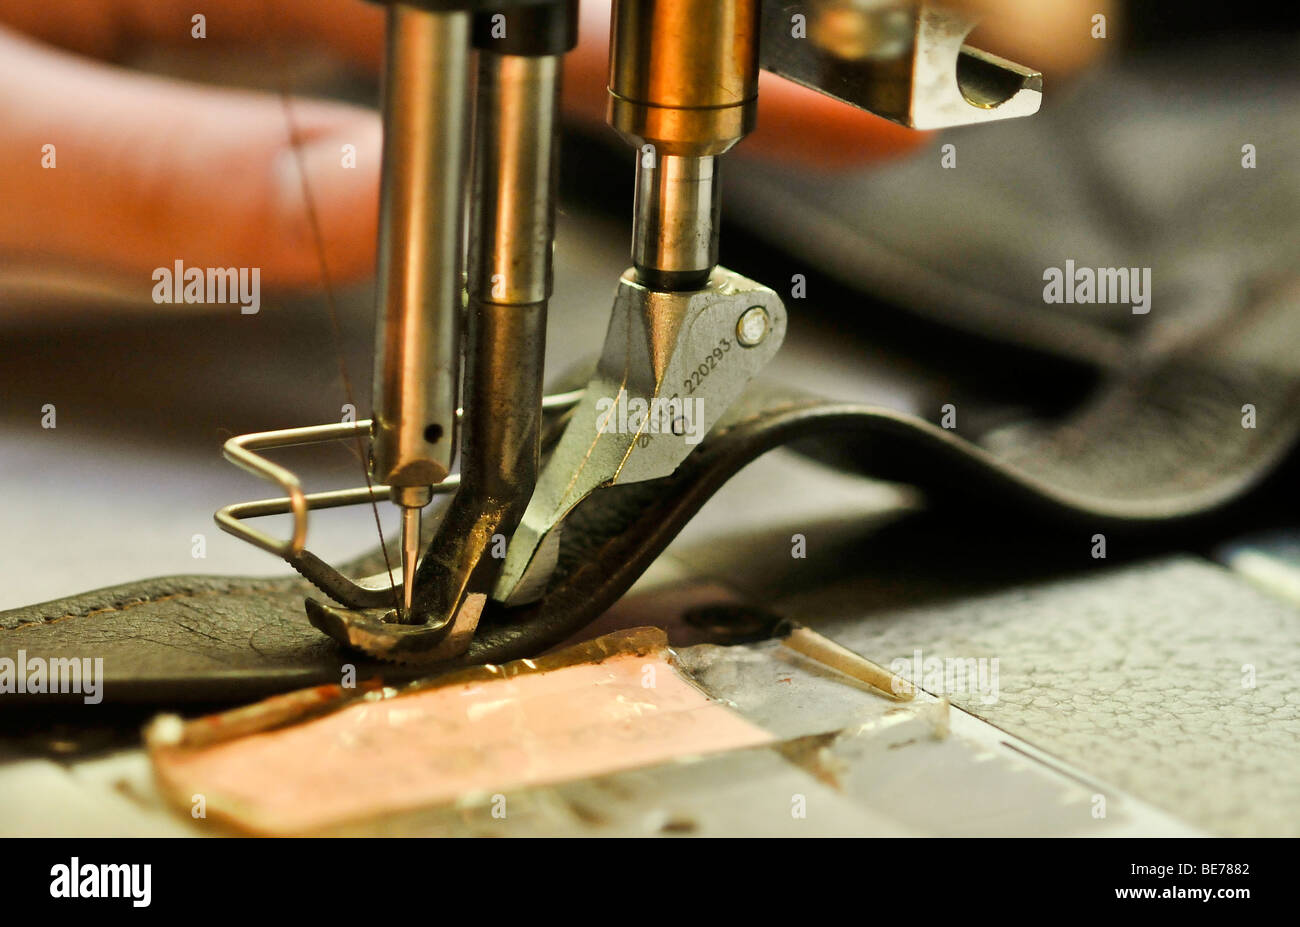 Sewing in luxury leather handicraft Stock Photo